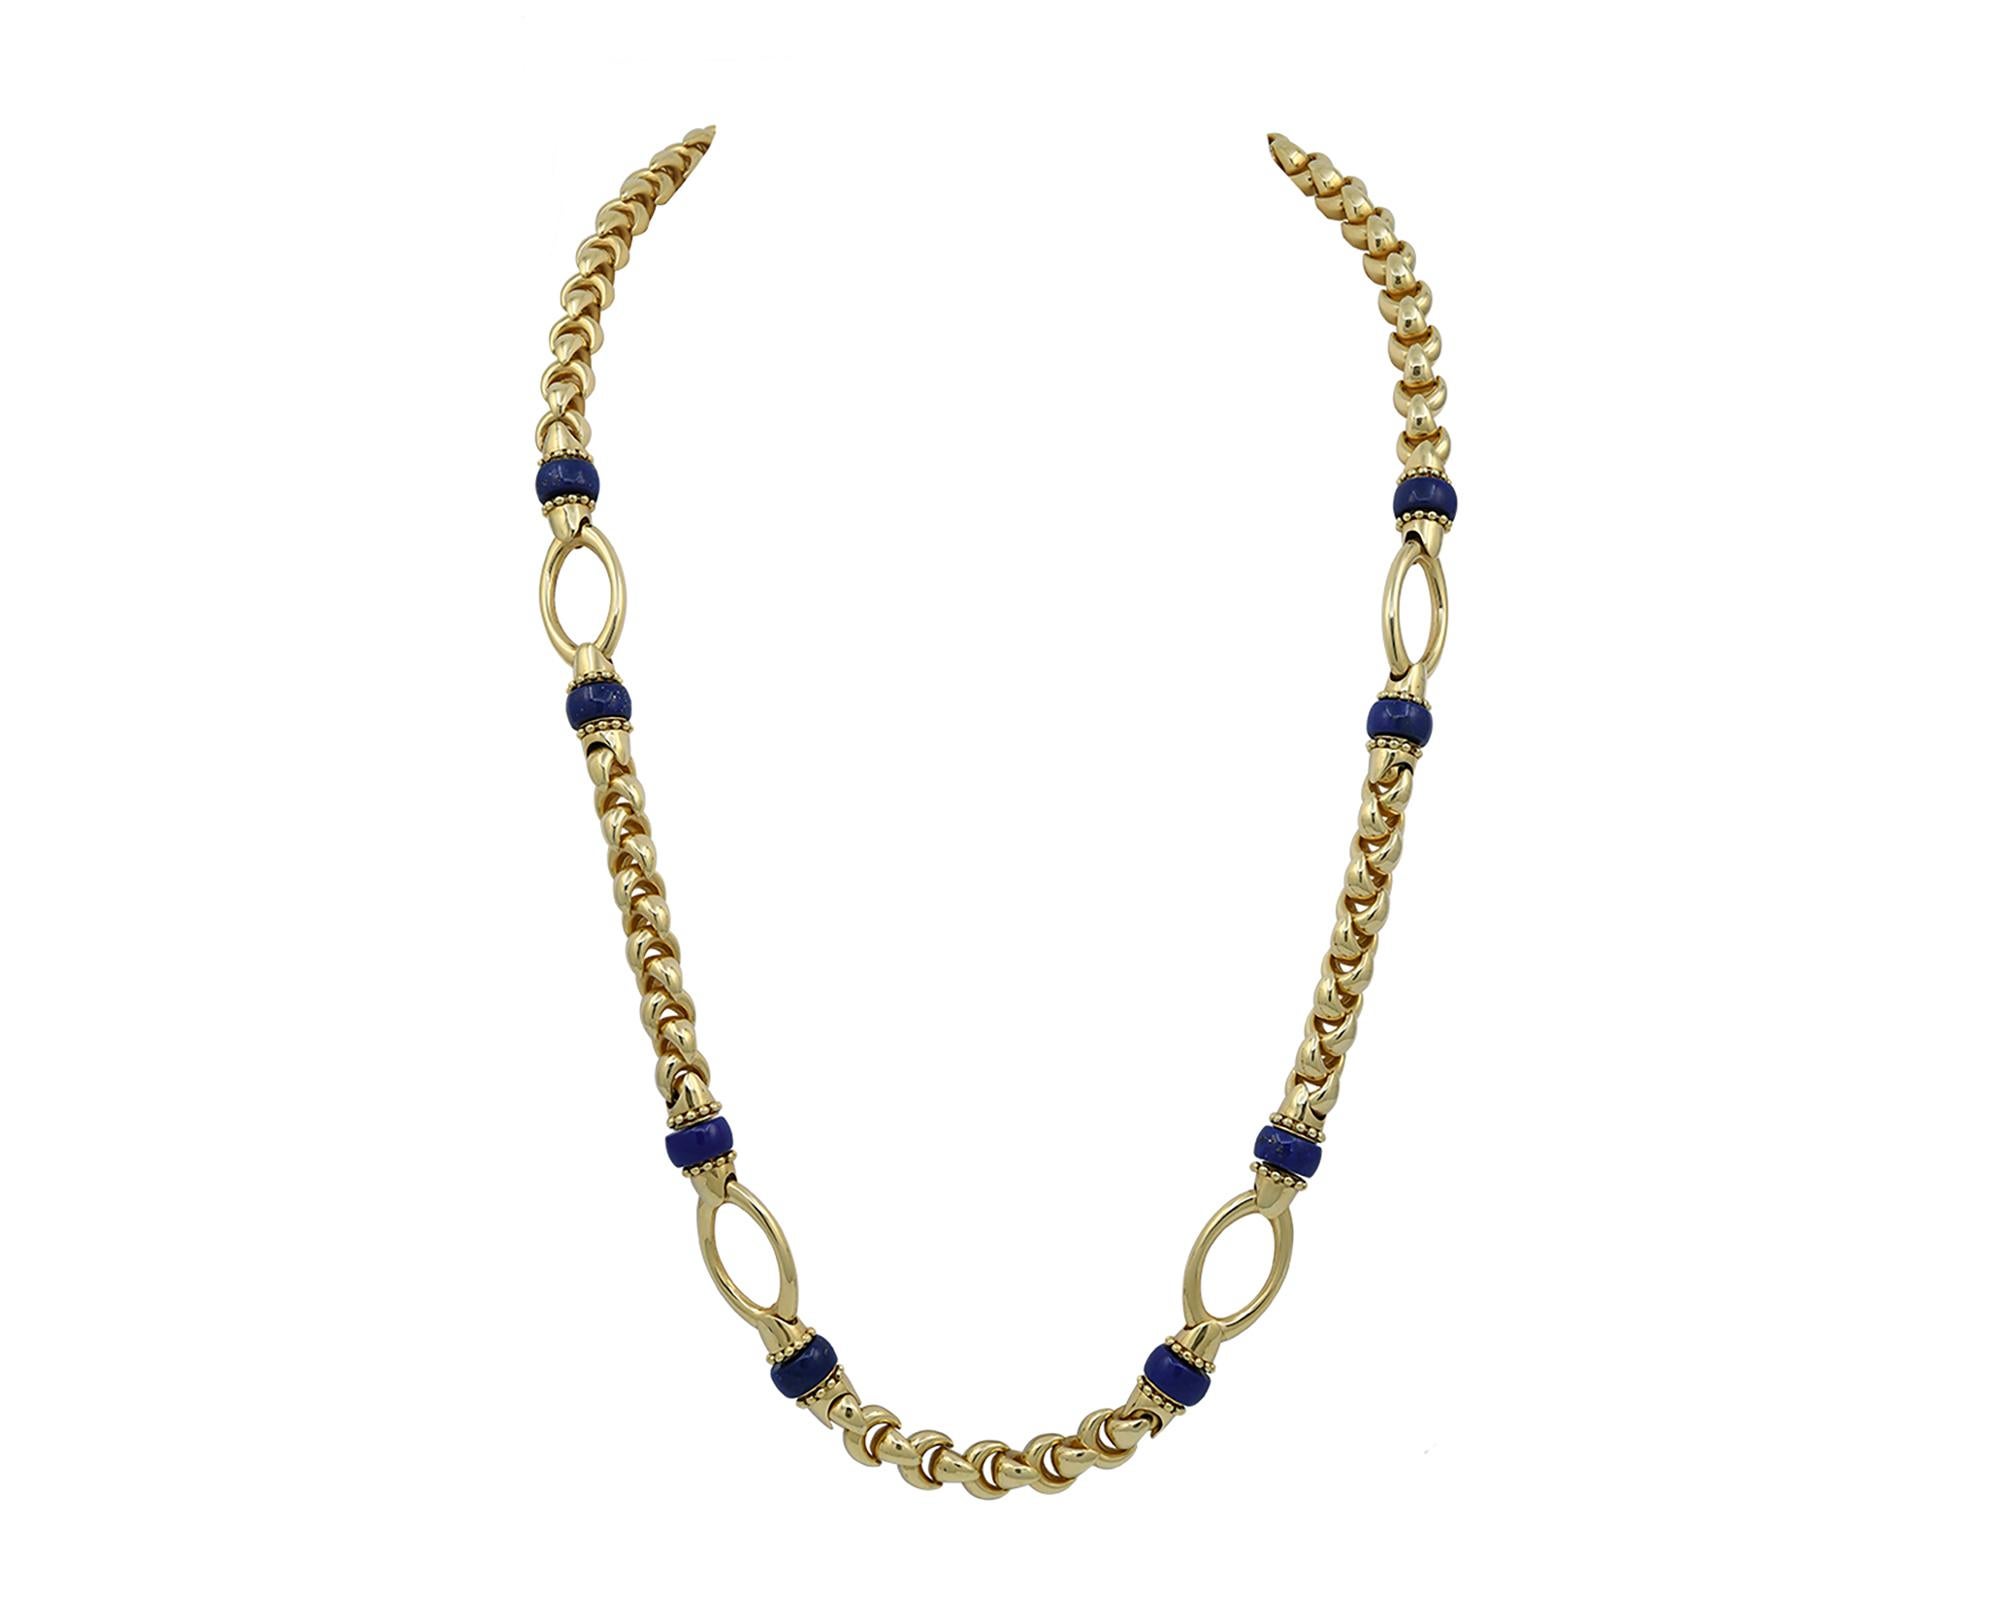 Mixed Cut Lapis Lazuli Necklace Earrings Bracelet Jewelry Set in 18k Yellow Gold For Sale